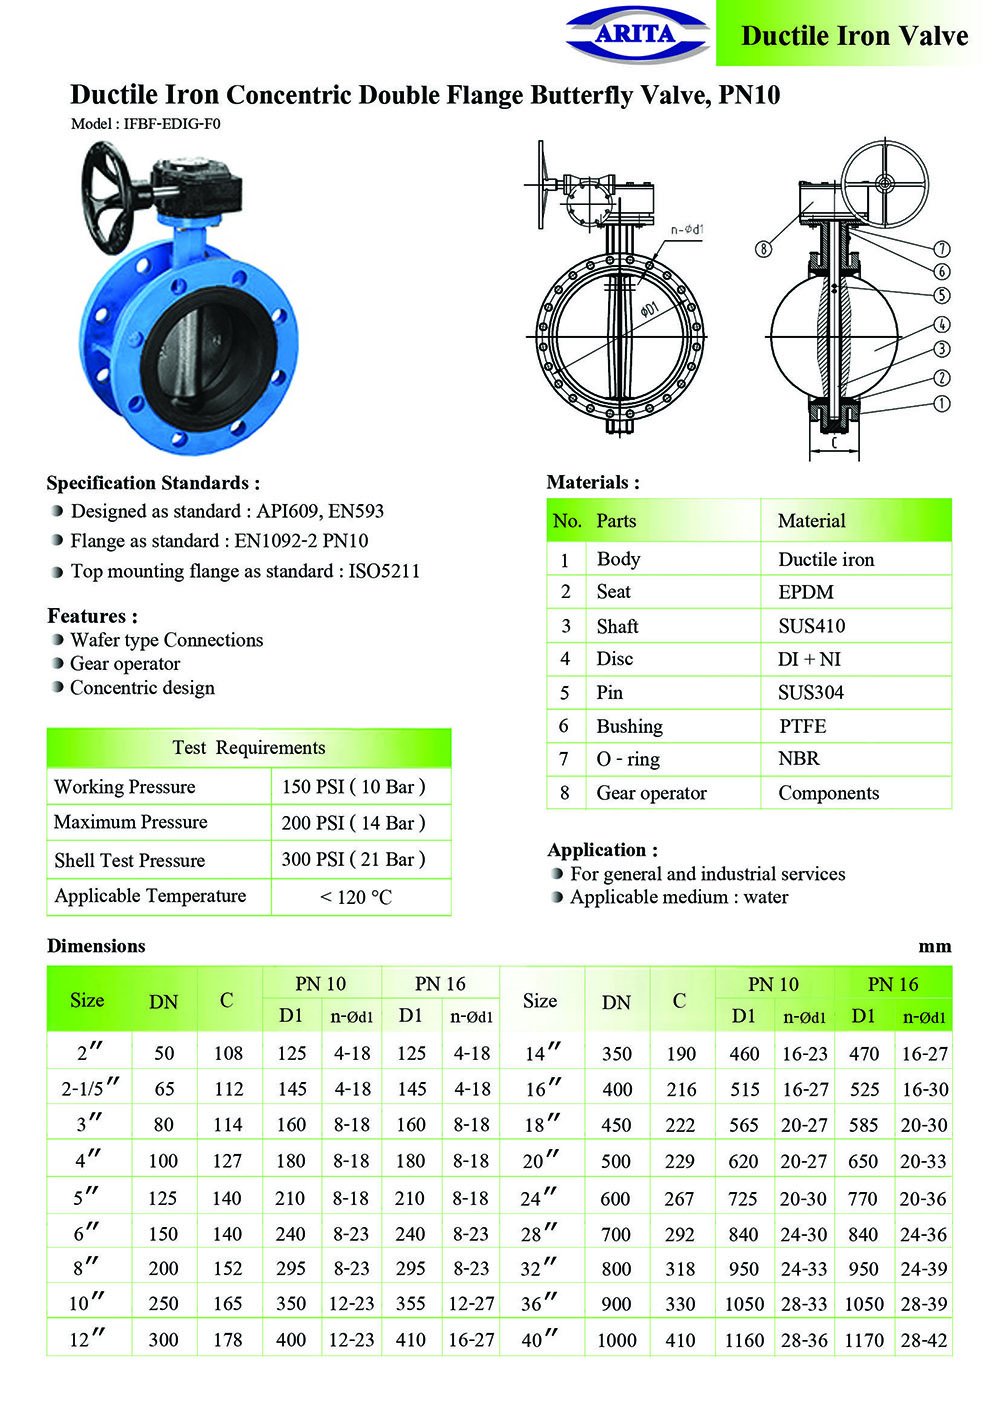 Ductile Iron Concentric Double Flange Butterfly Valve, PN10